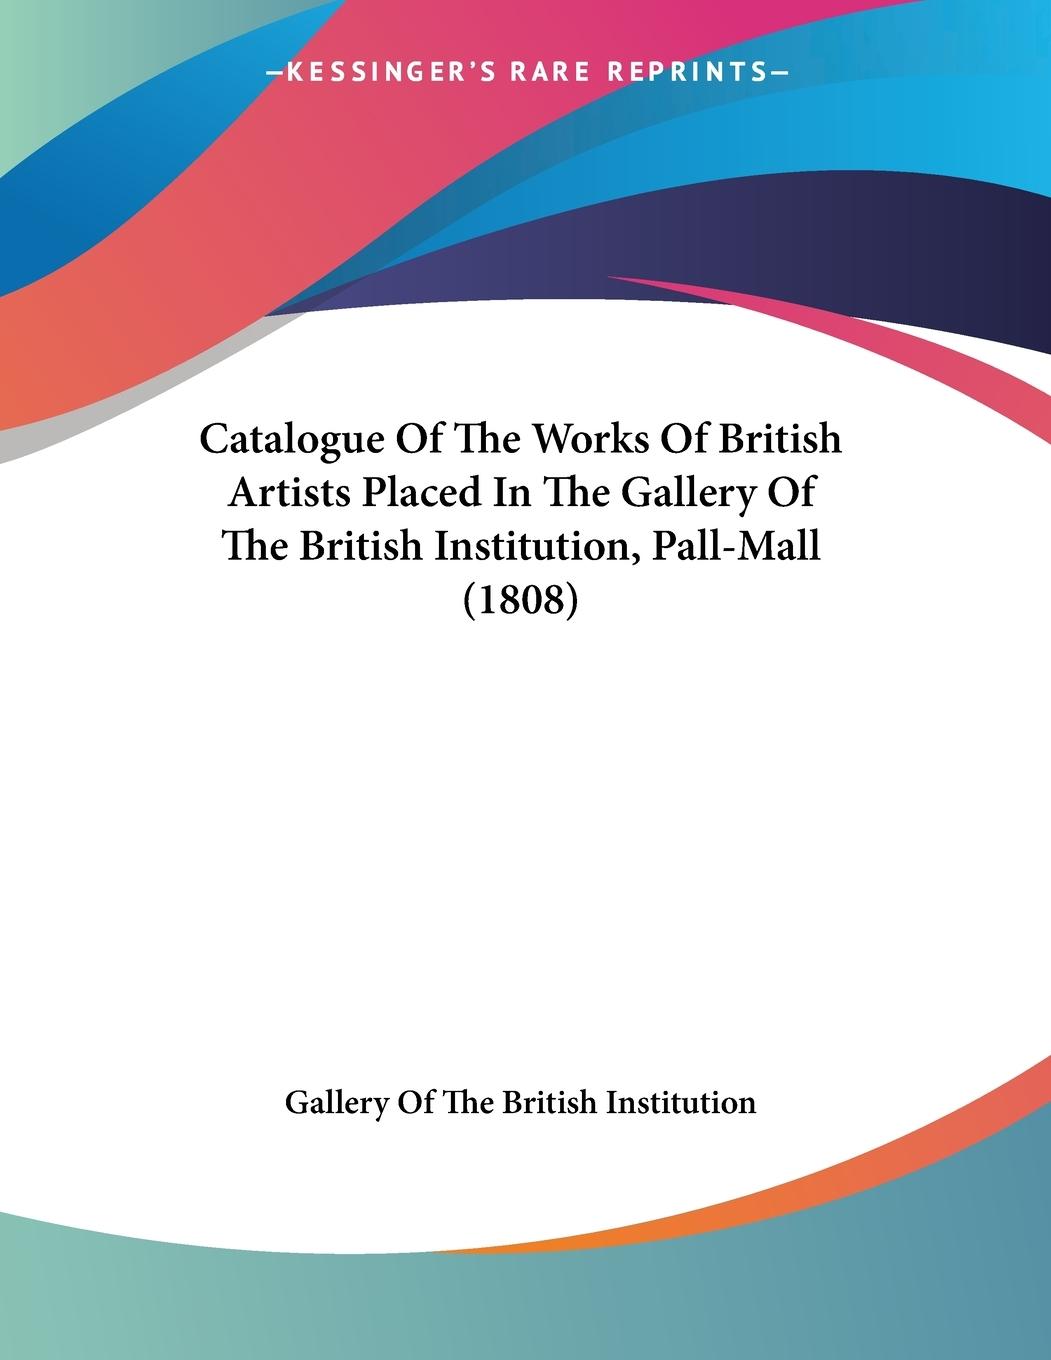 Catalogue Of The Works Of British Artists Placed In The Gallery Of The British Institution, Pall-Mall (1808) - Gallery Of The British Institution